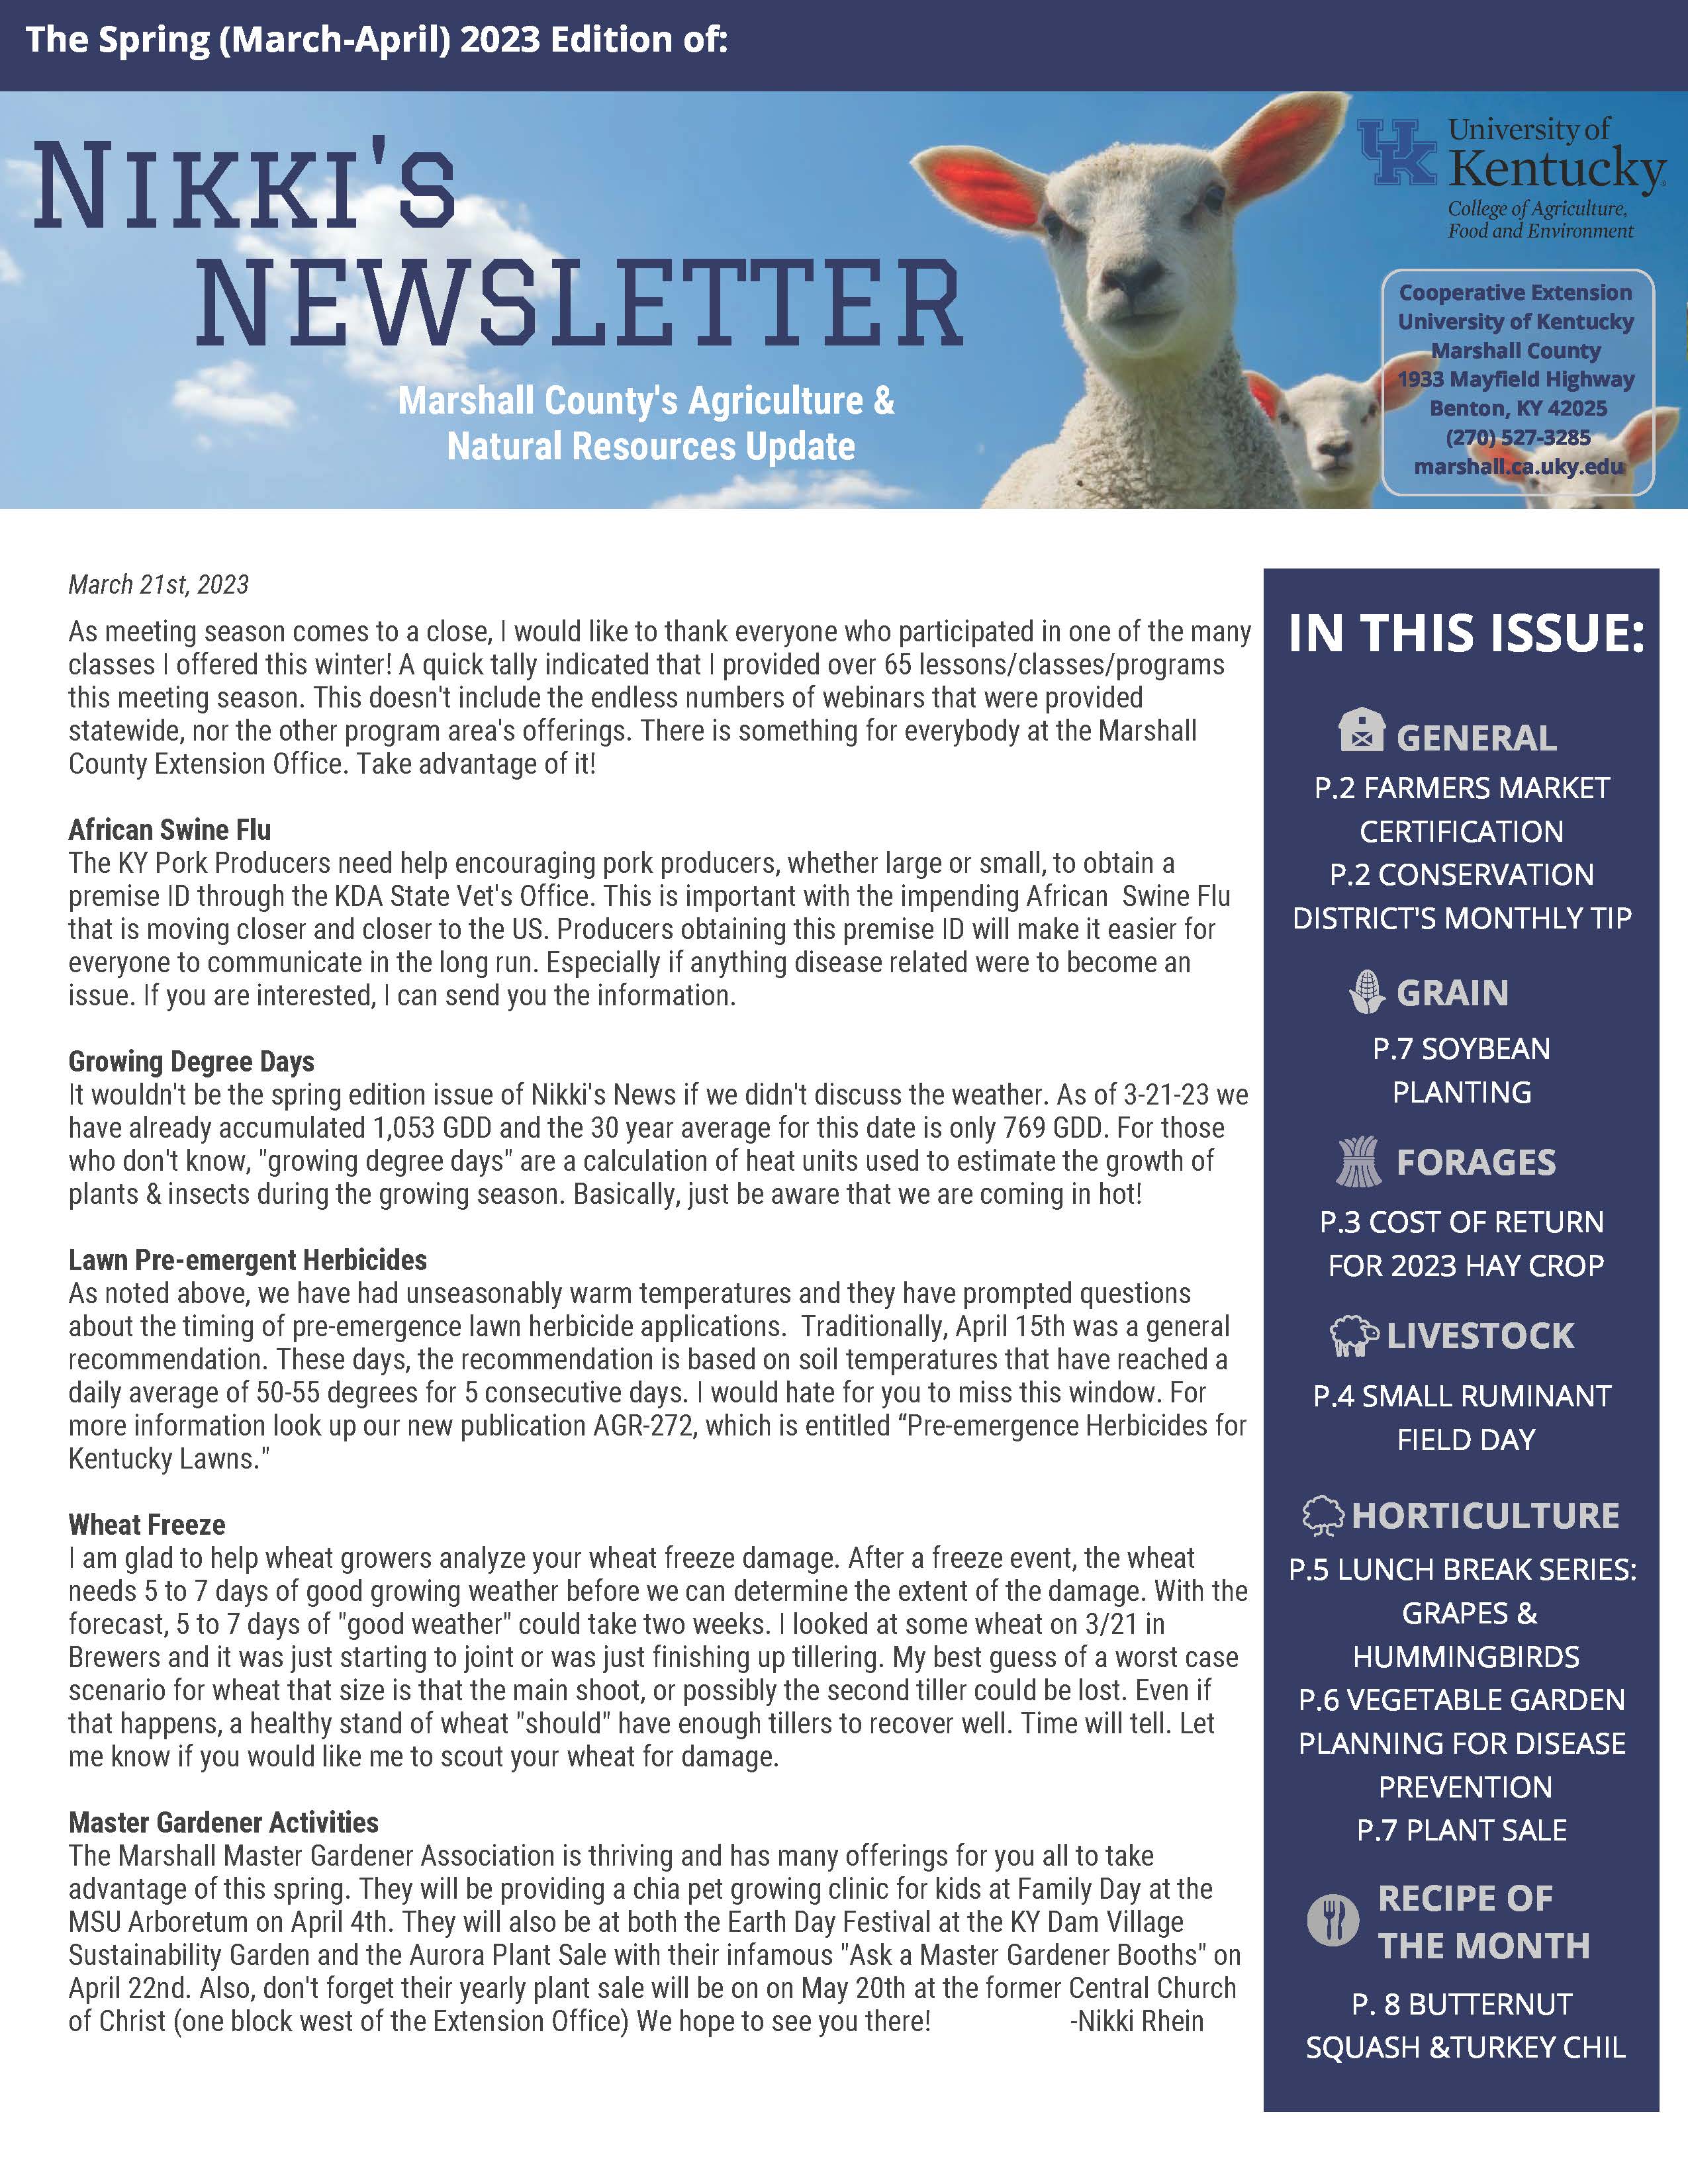 Newsletter with sheep